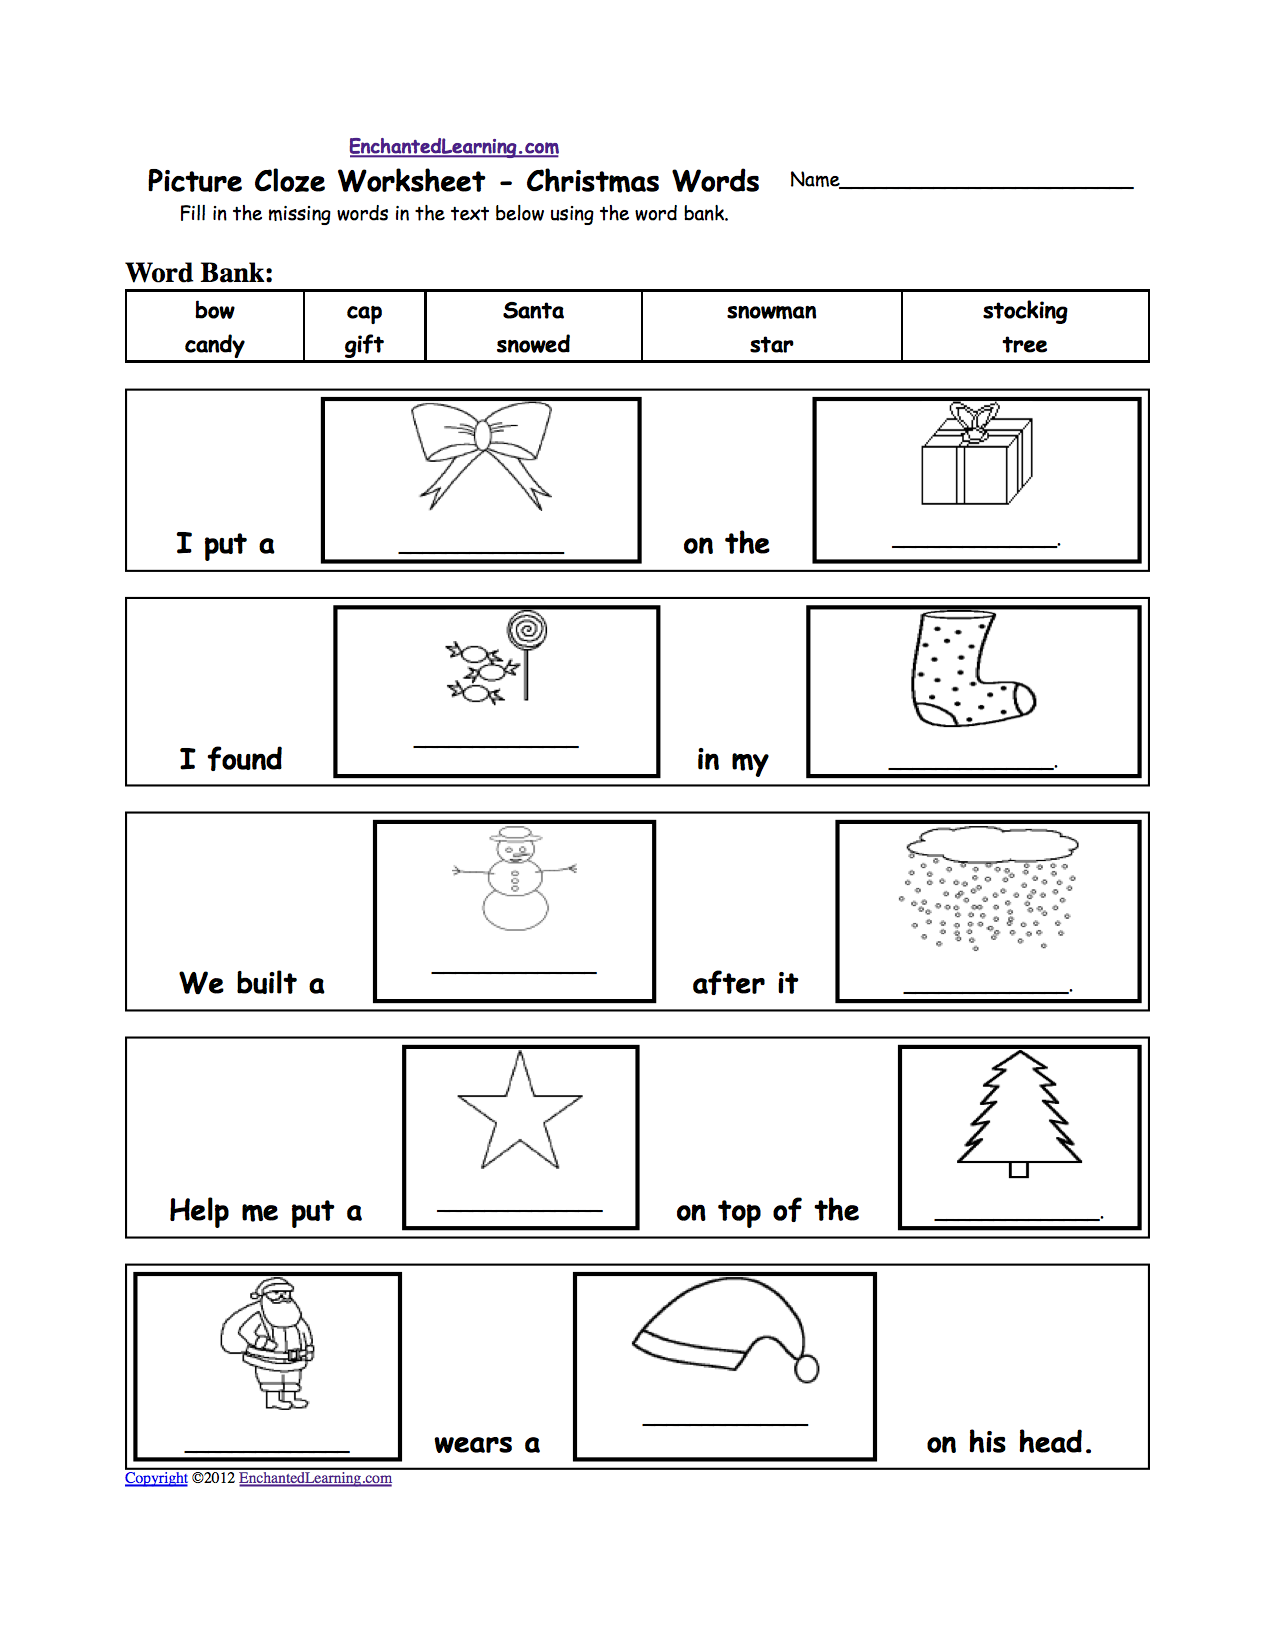 picture-cloze-worksheet-holiday-and-seasons-words-enchantedlearning